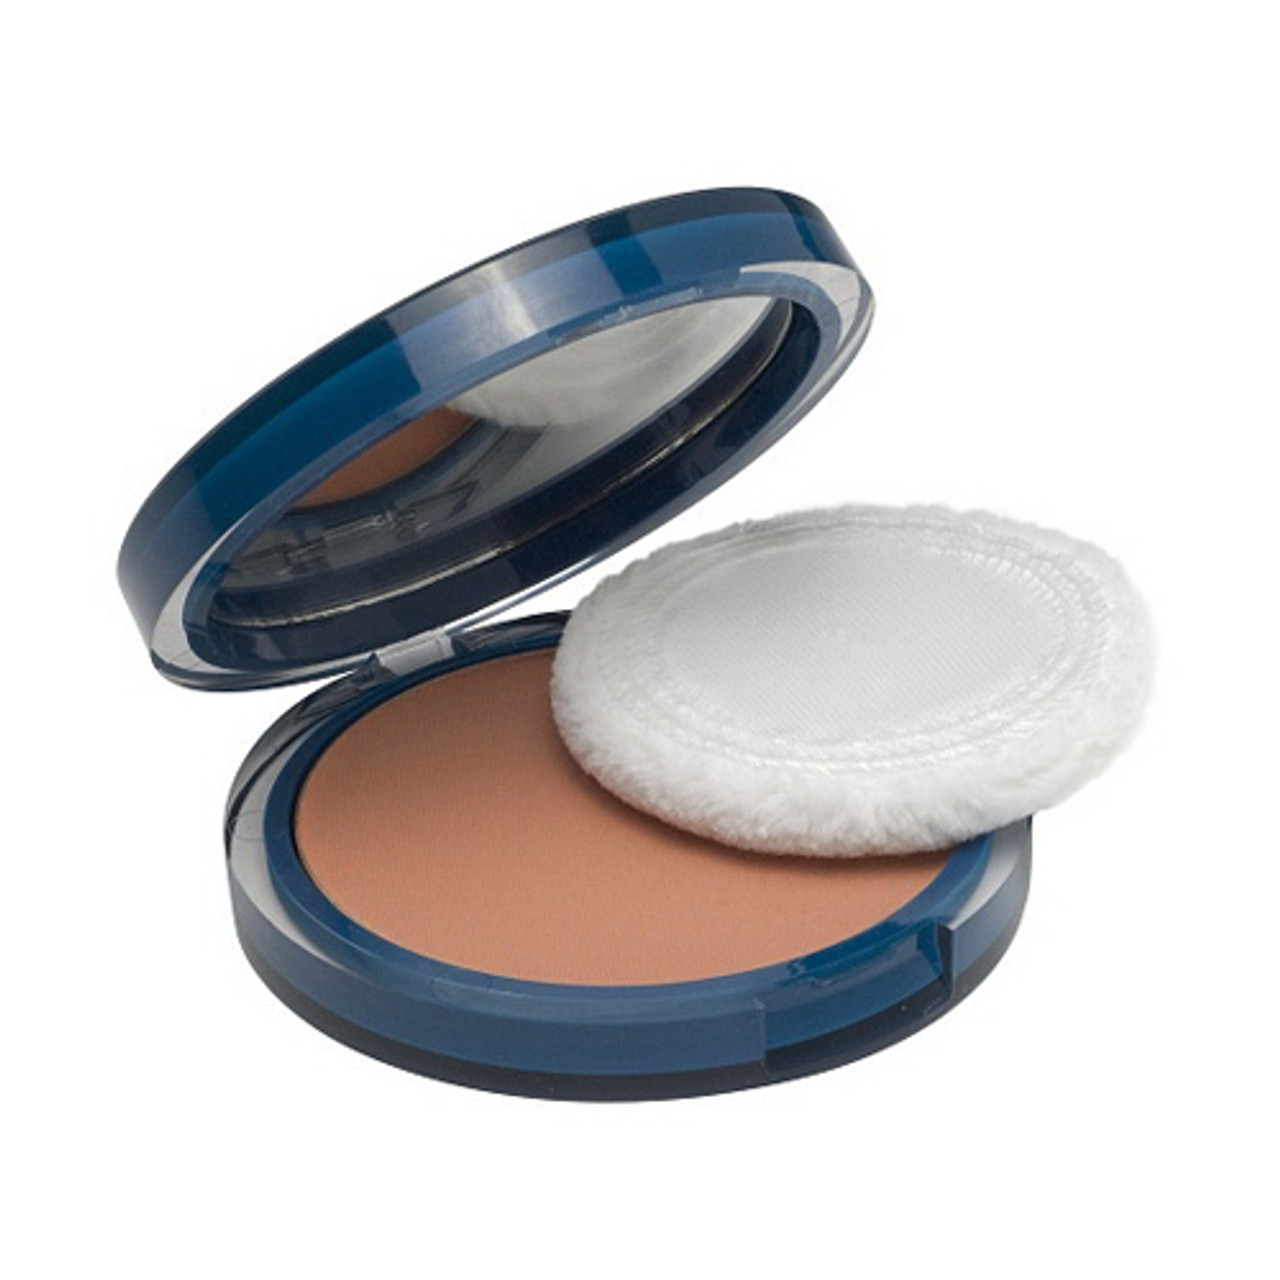 Covergirl Clean Oil Control Compact Pressed Powder, Warm Beige 545 - 0. ...